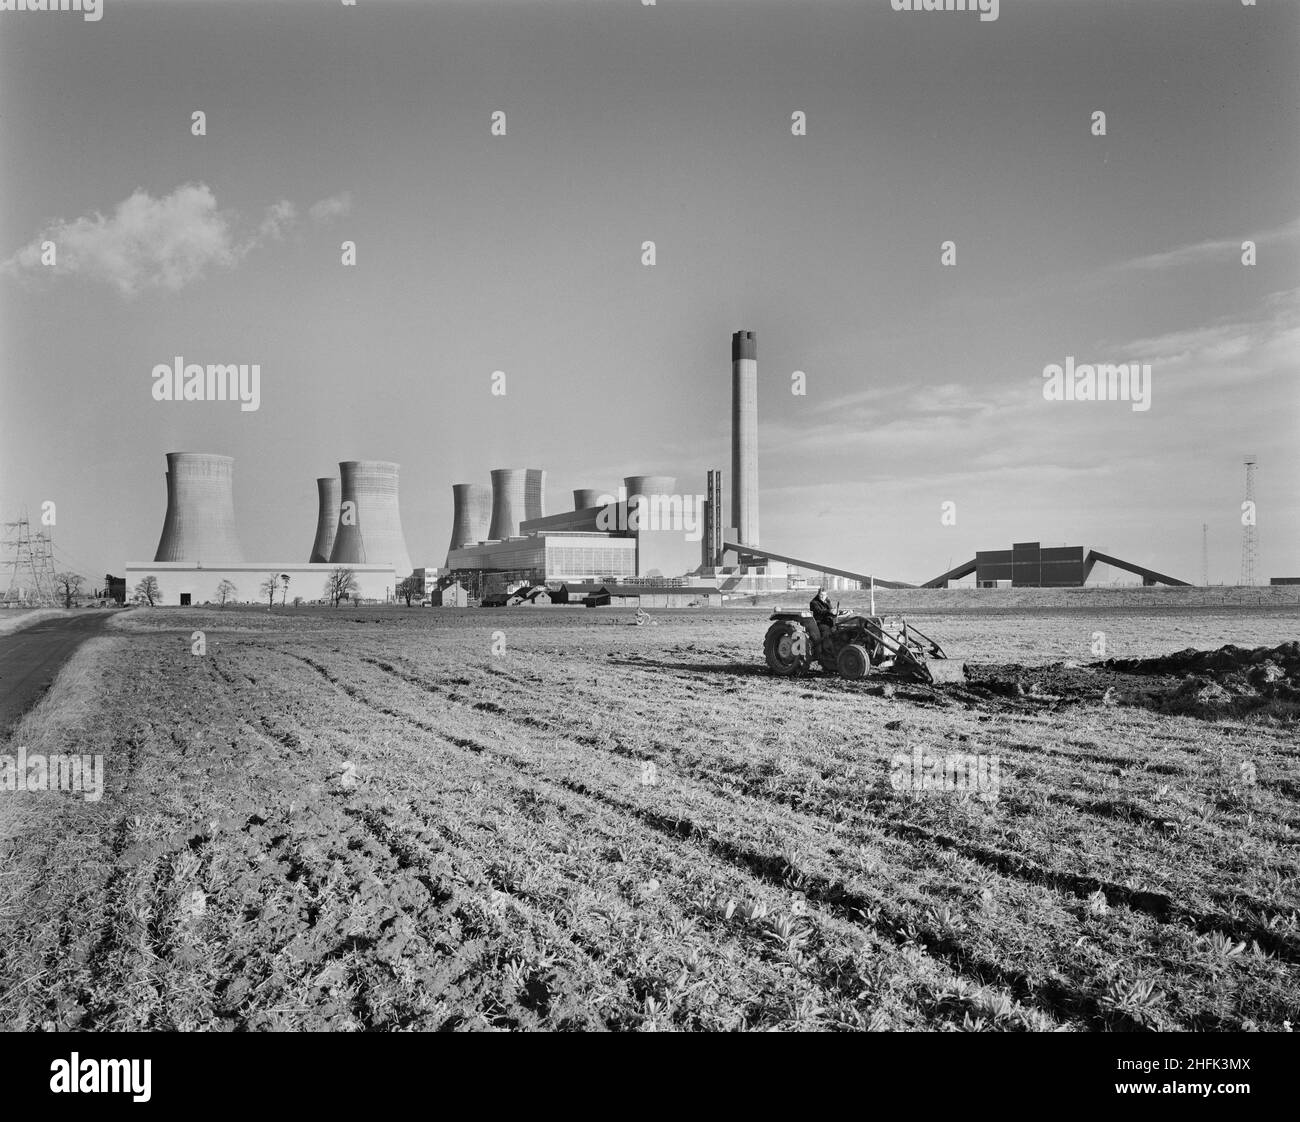 A view of Eggborough Power Station from the south-west, showing a front-loader tractor working in the field in the foreground. This image was catalogued as part of the Breaking New Ground Project in partnership with the John Laing Charitable Trust in 2019-20. Stock Photo